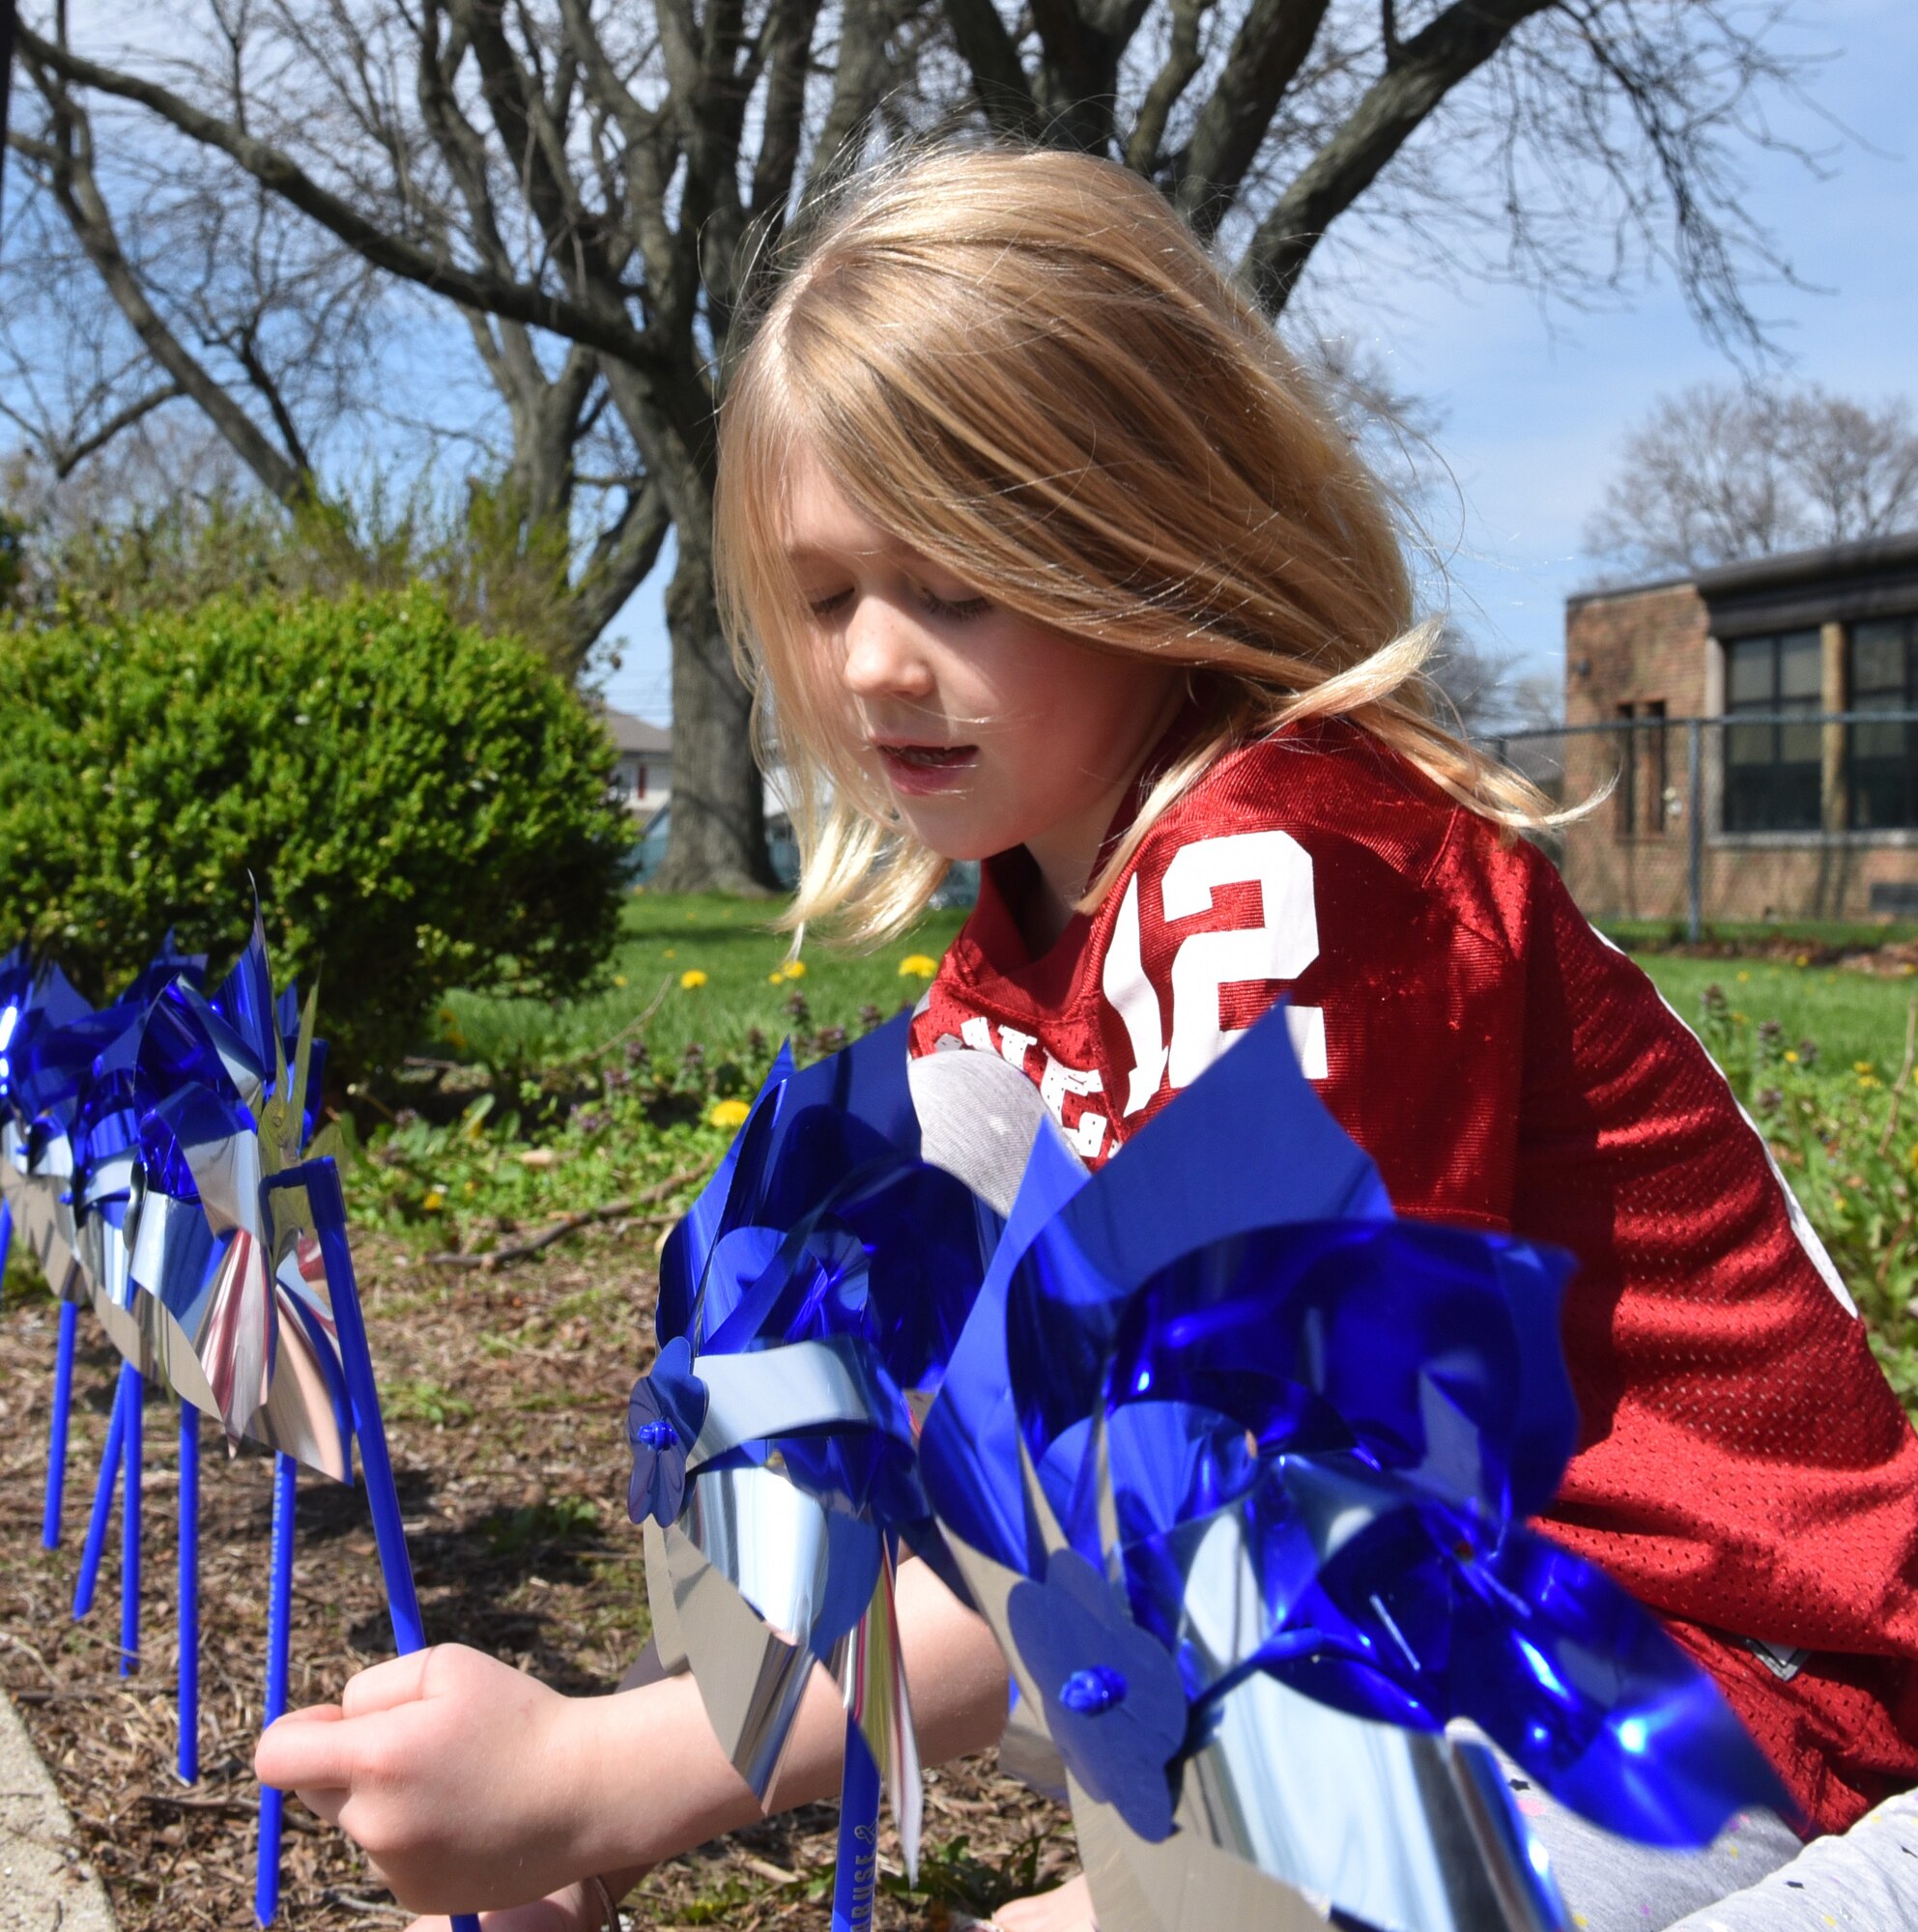 Child places blue pinwheel in ground.